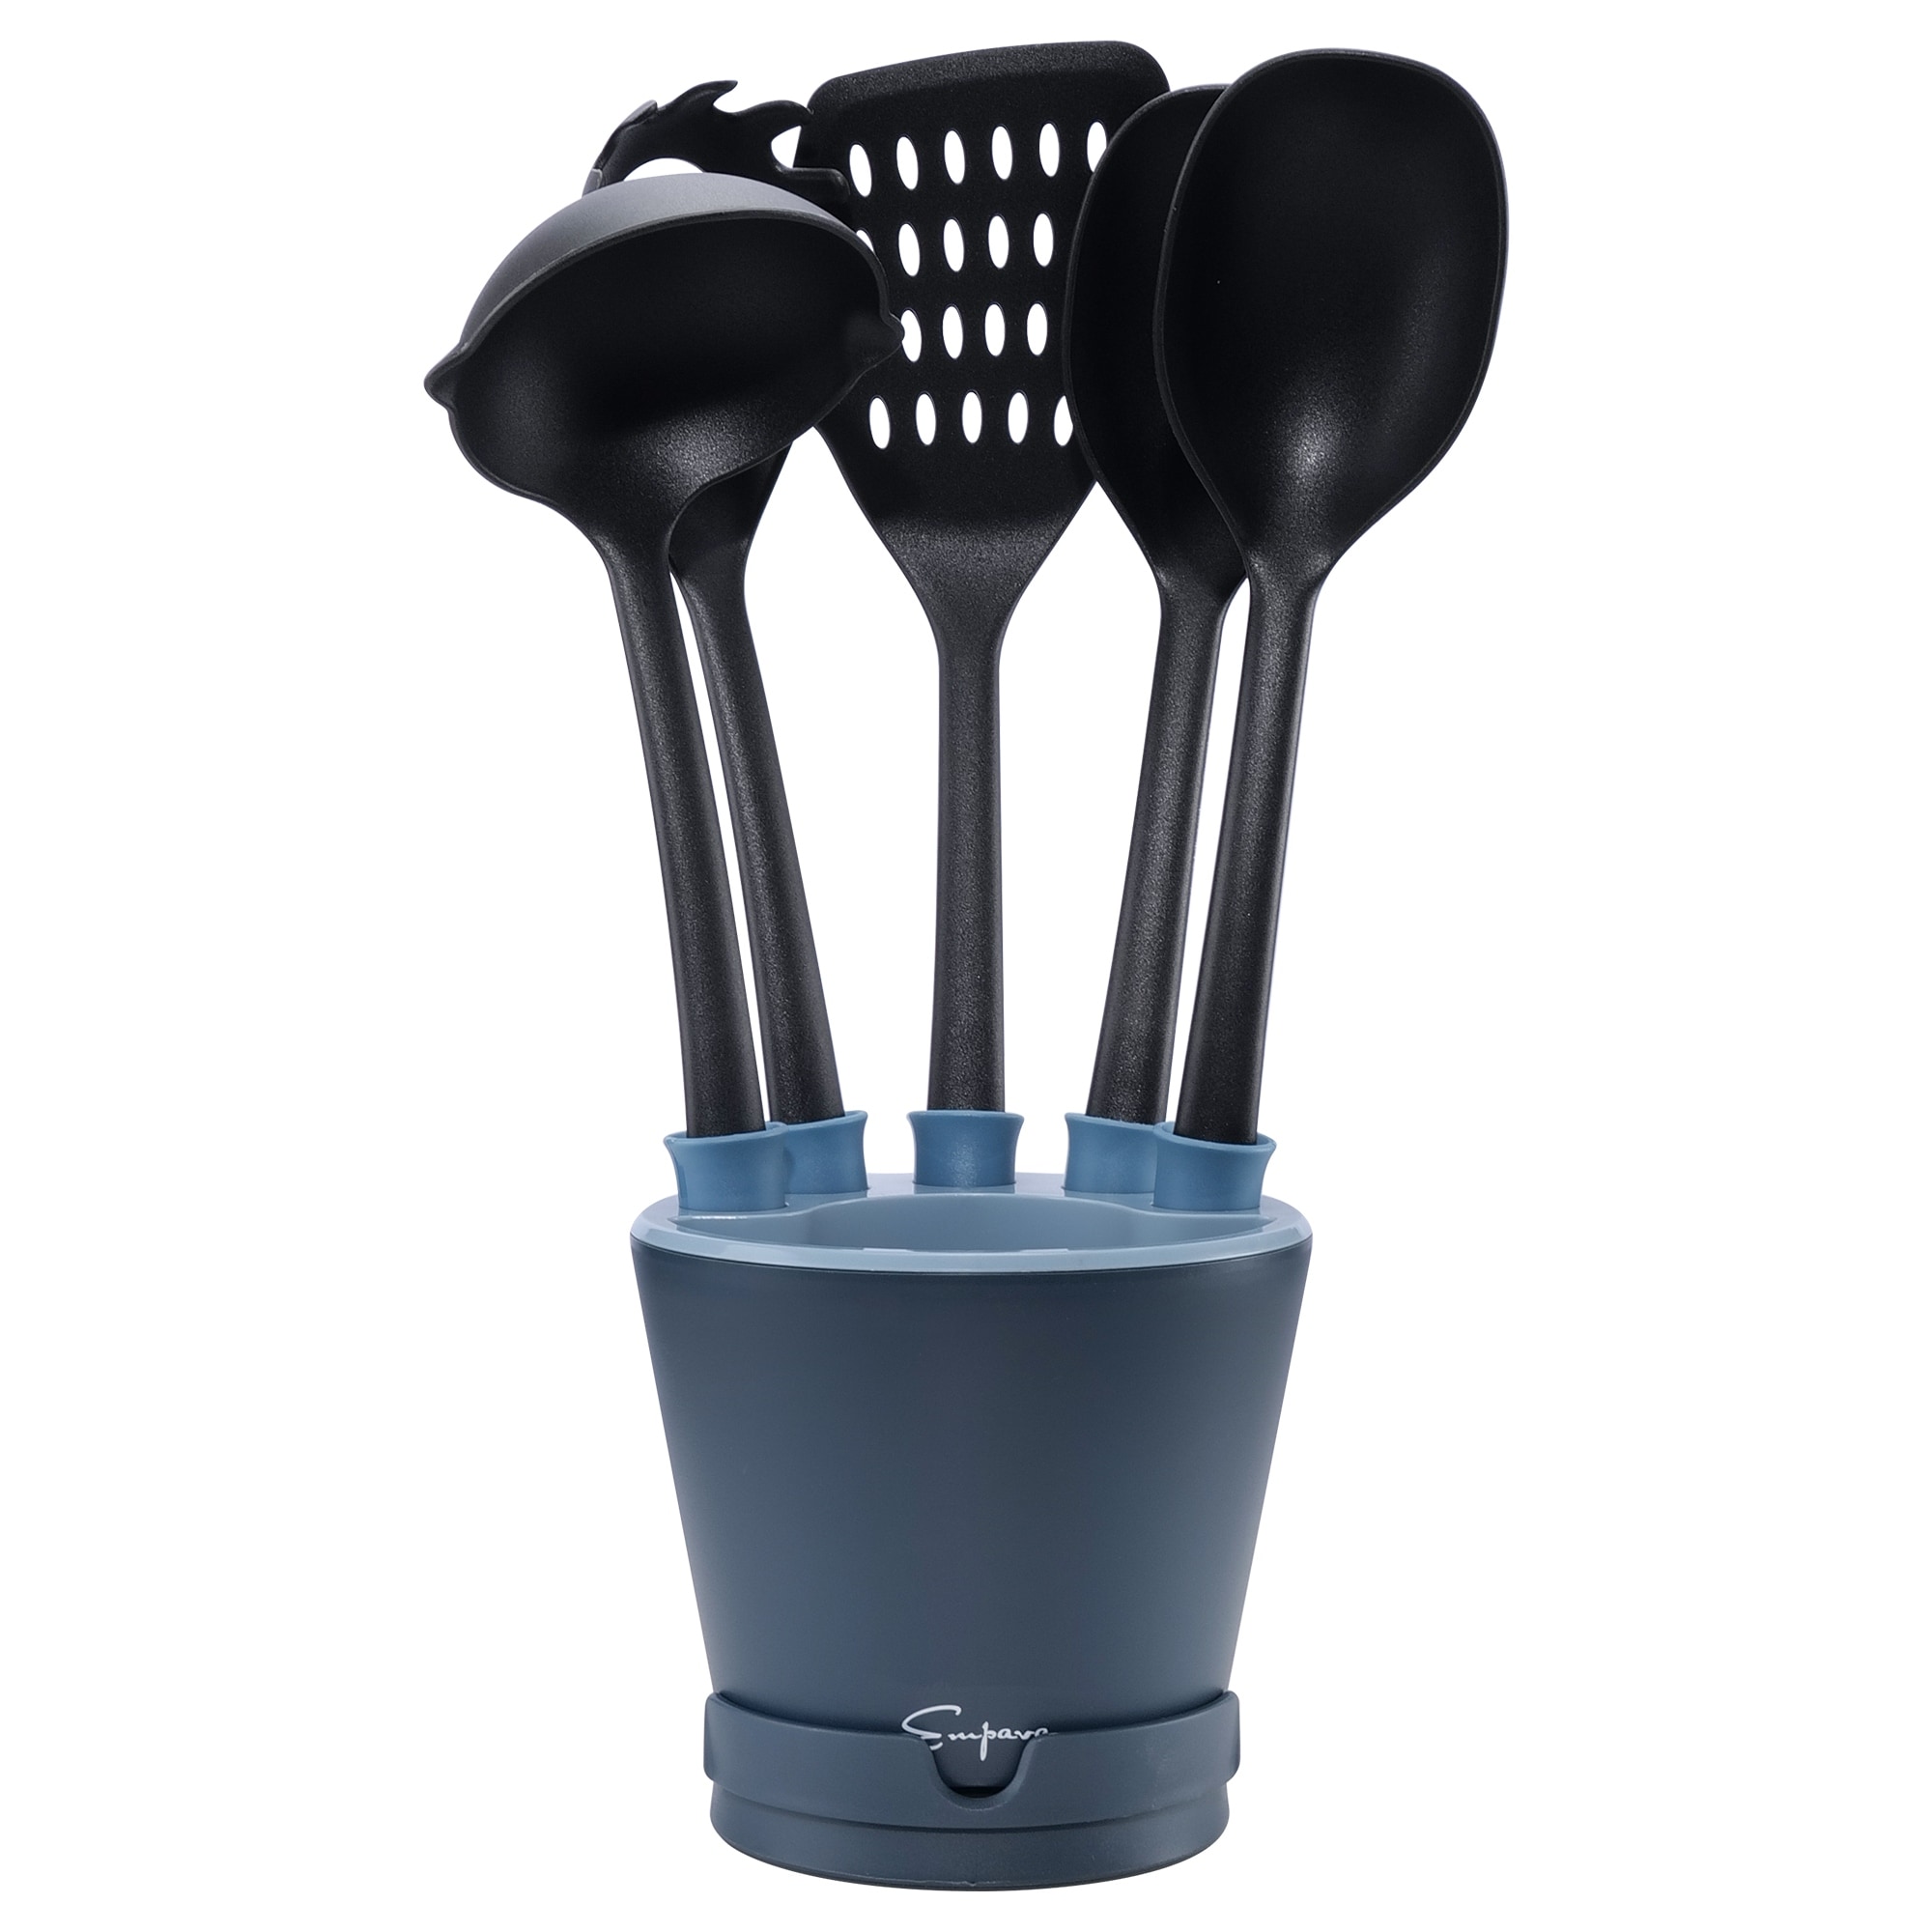 Buy Multi-function Kitchen Utensils Tools Small Frying Ladle from